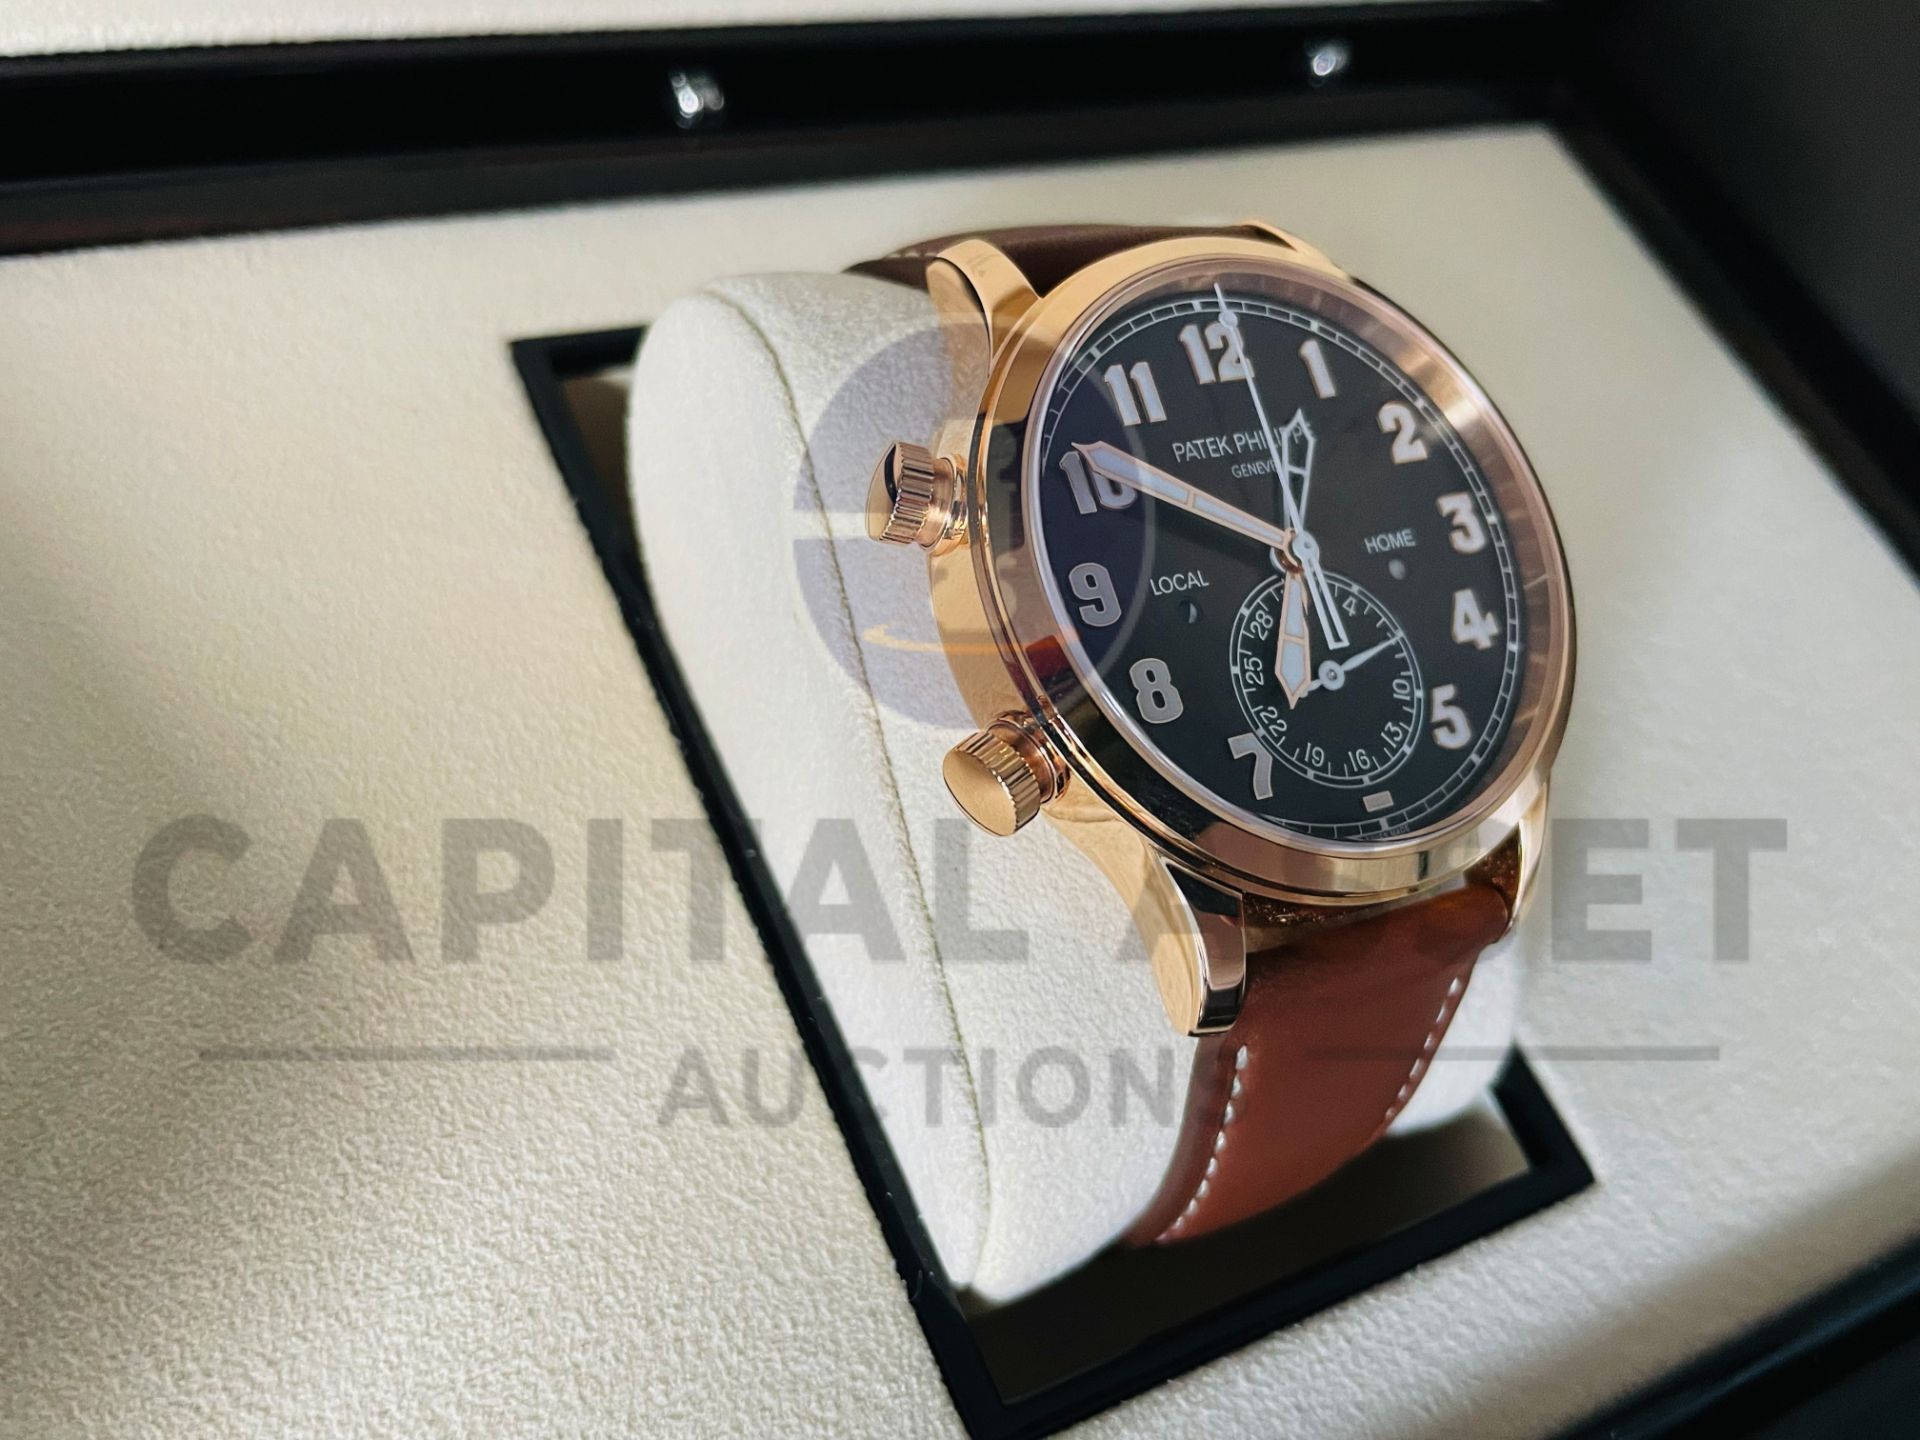 (On Sale) PATEK PHILIPPE CALATRAVE PILOT *42mm ROSE GOLD* (2022) *BEAT THE 5 YEAR WAITING LIST* - Image 11 of 18